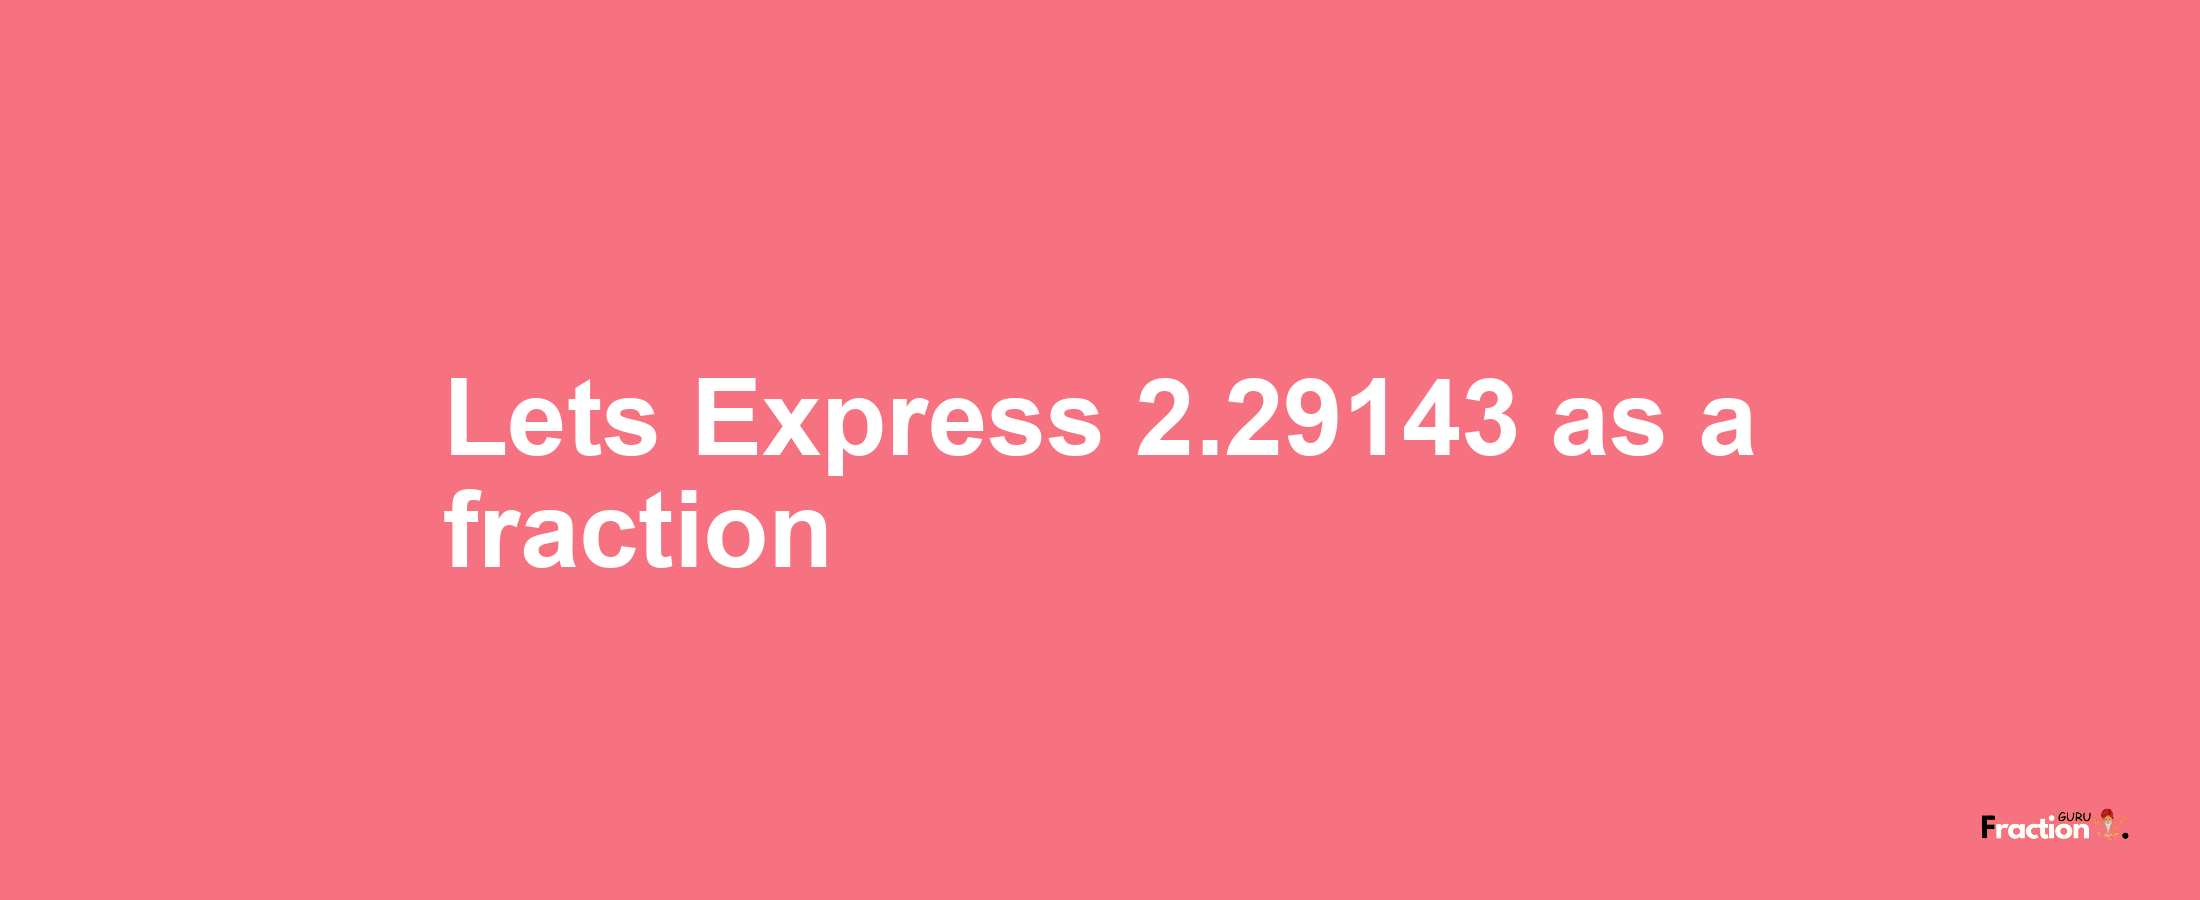 Lets Express 2.29143 as afraction